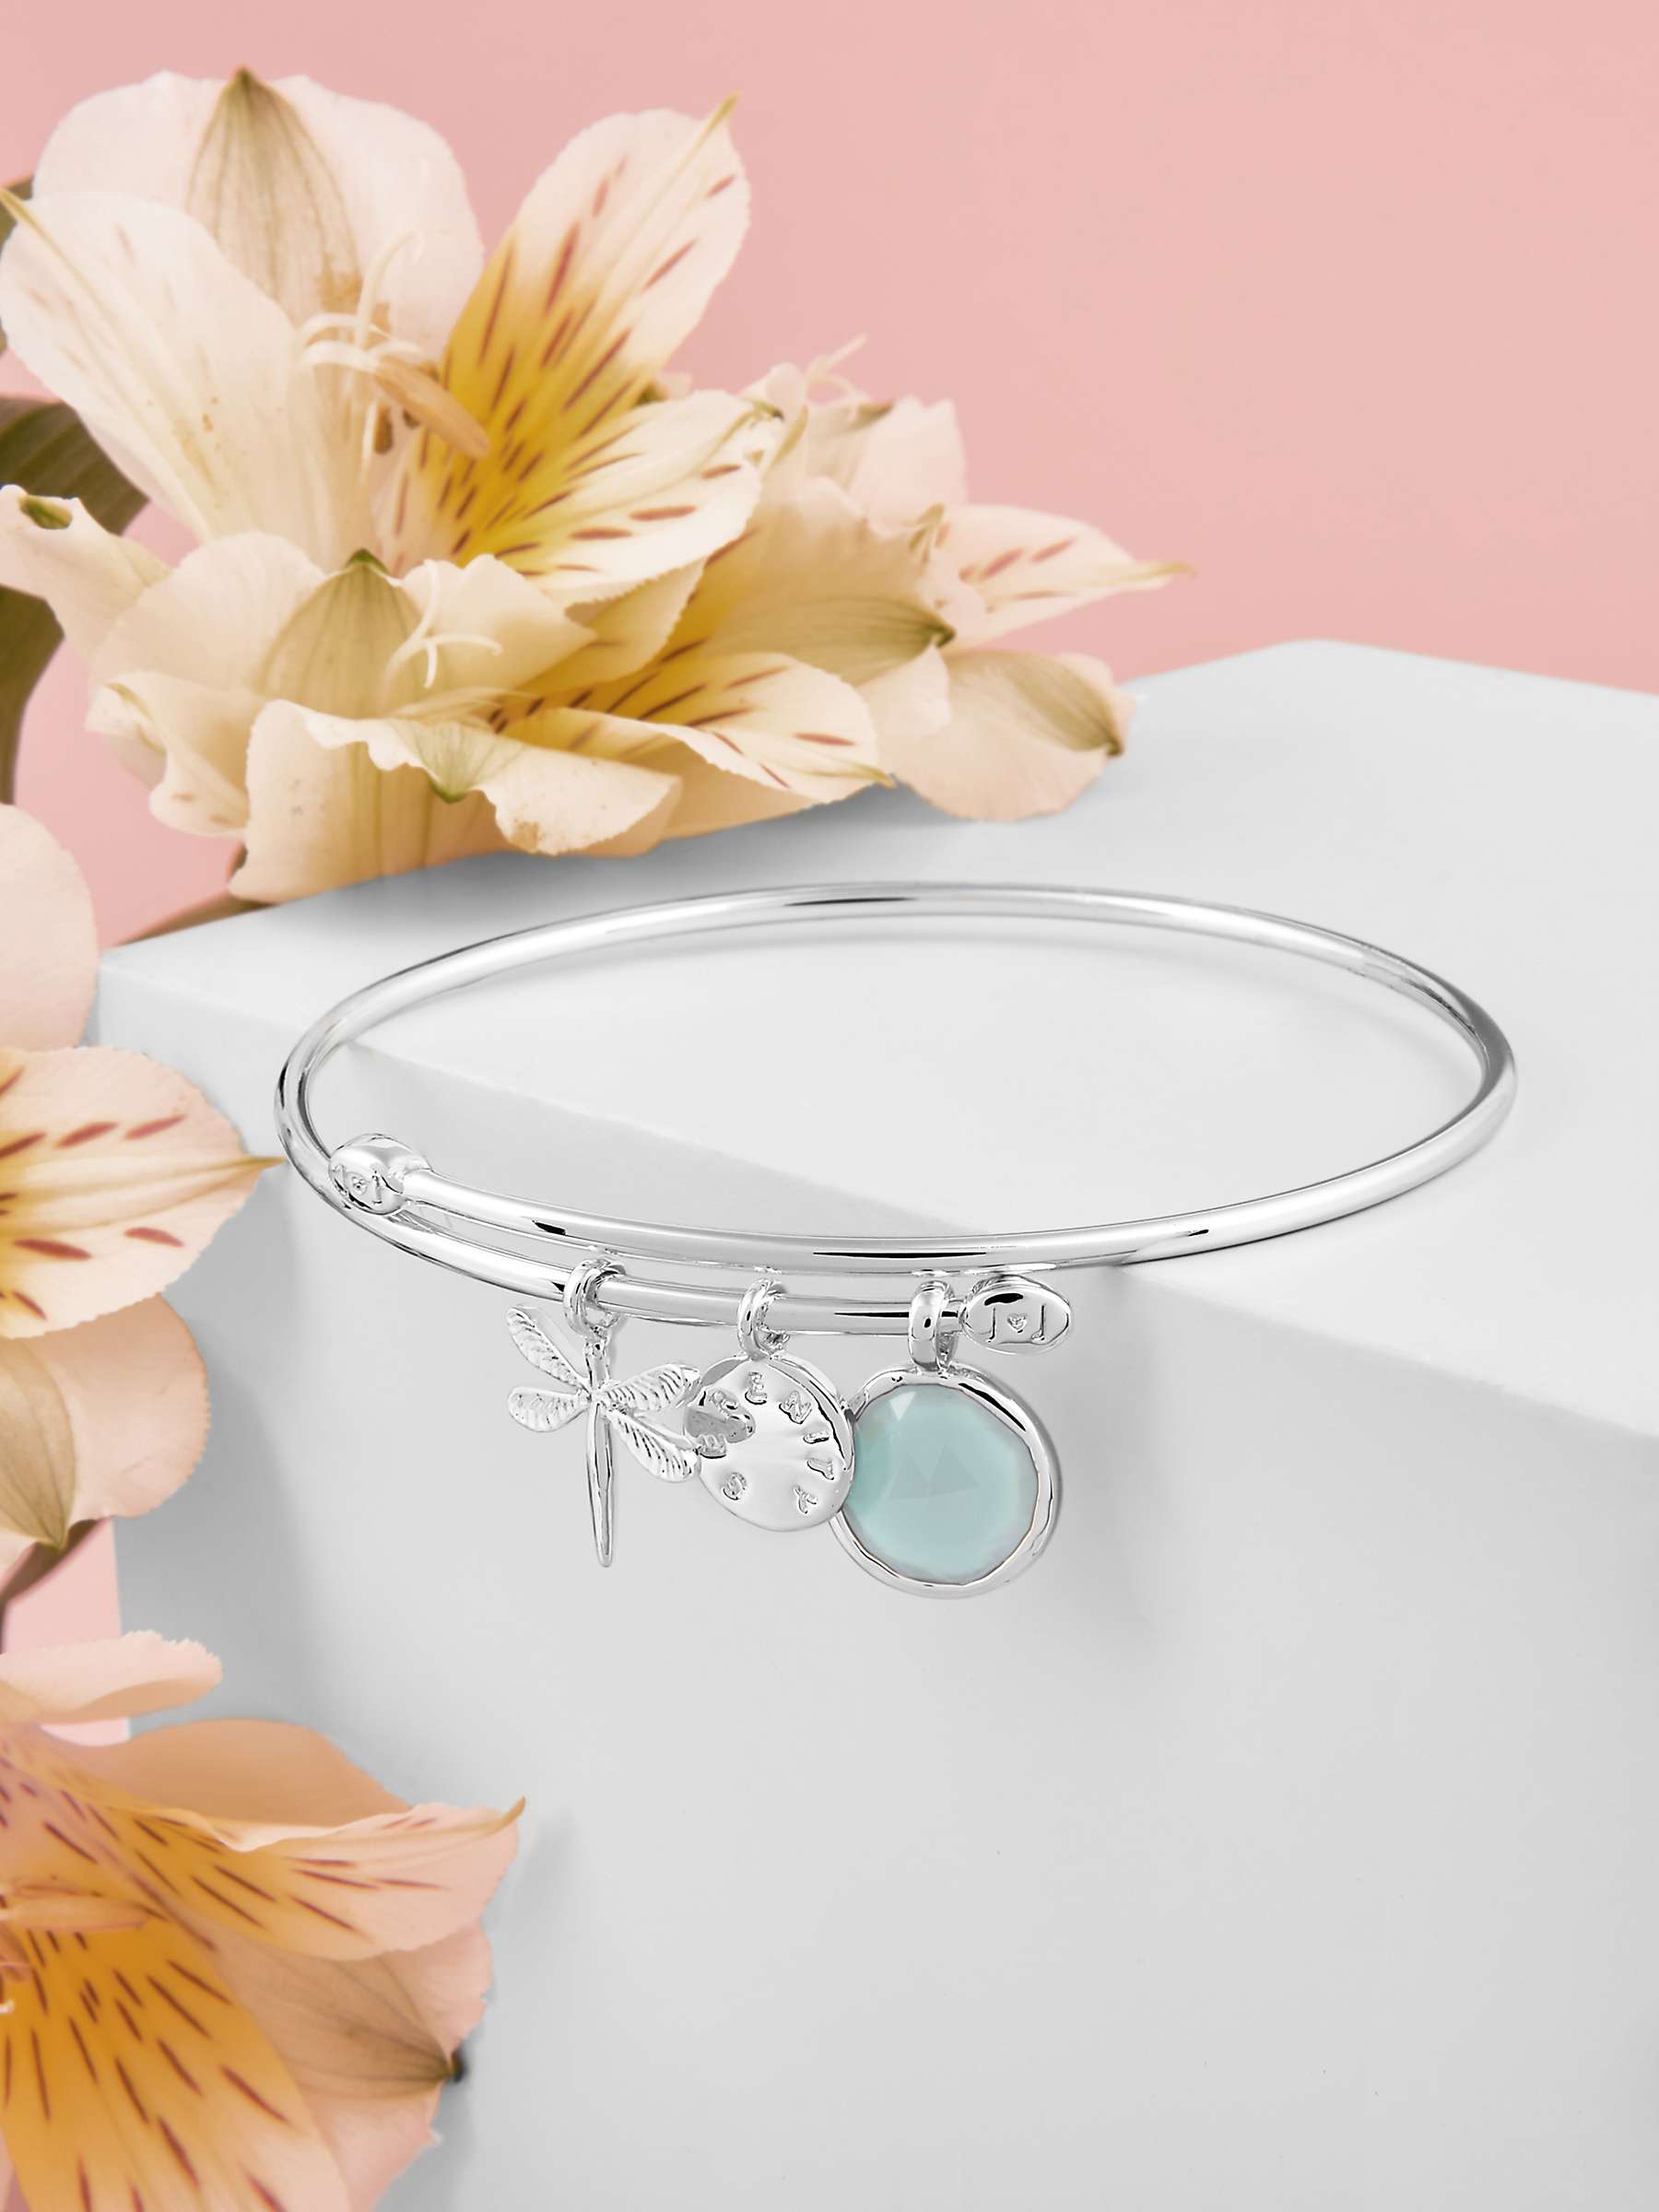 Buy Joma Jewellery Sterling Silver Plated Crystal Story Serenity Bangle, Silver Online at johnlewis.com